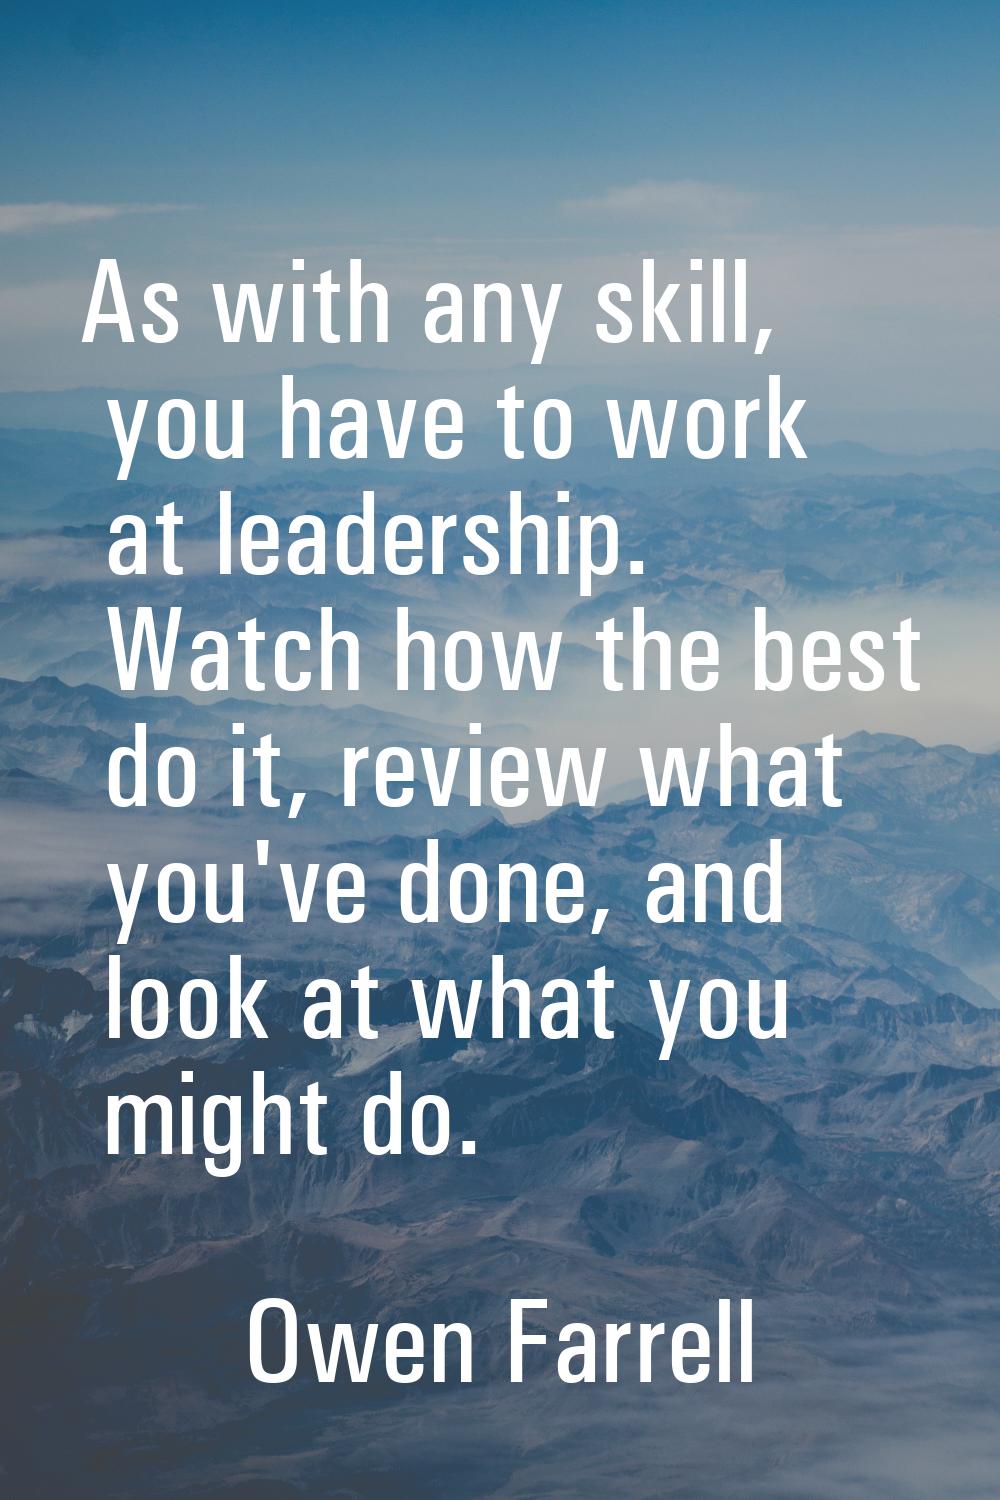 As with any skill, you have to work at leadership. Watch how the best do it, review what you've don